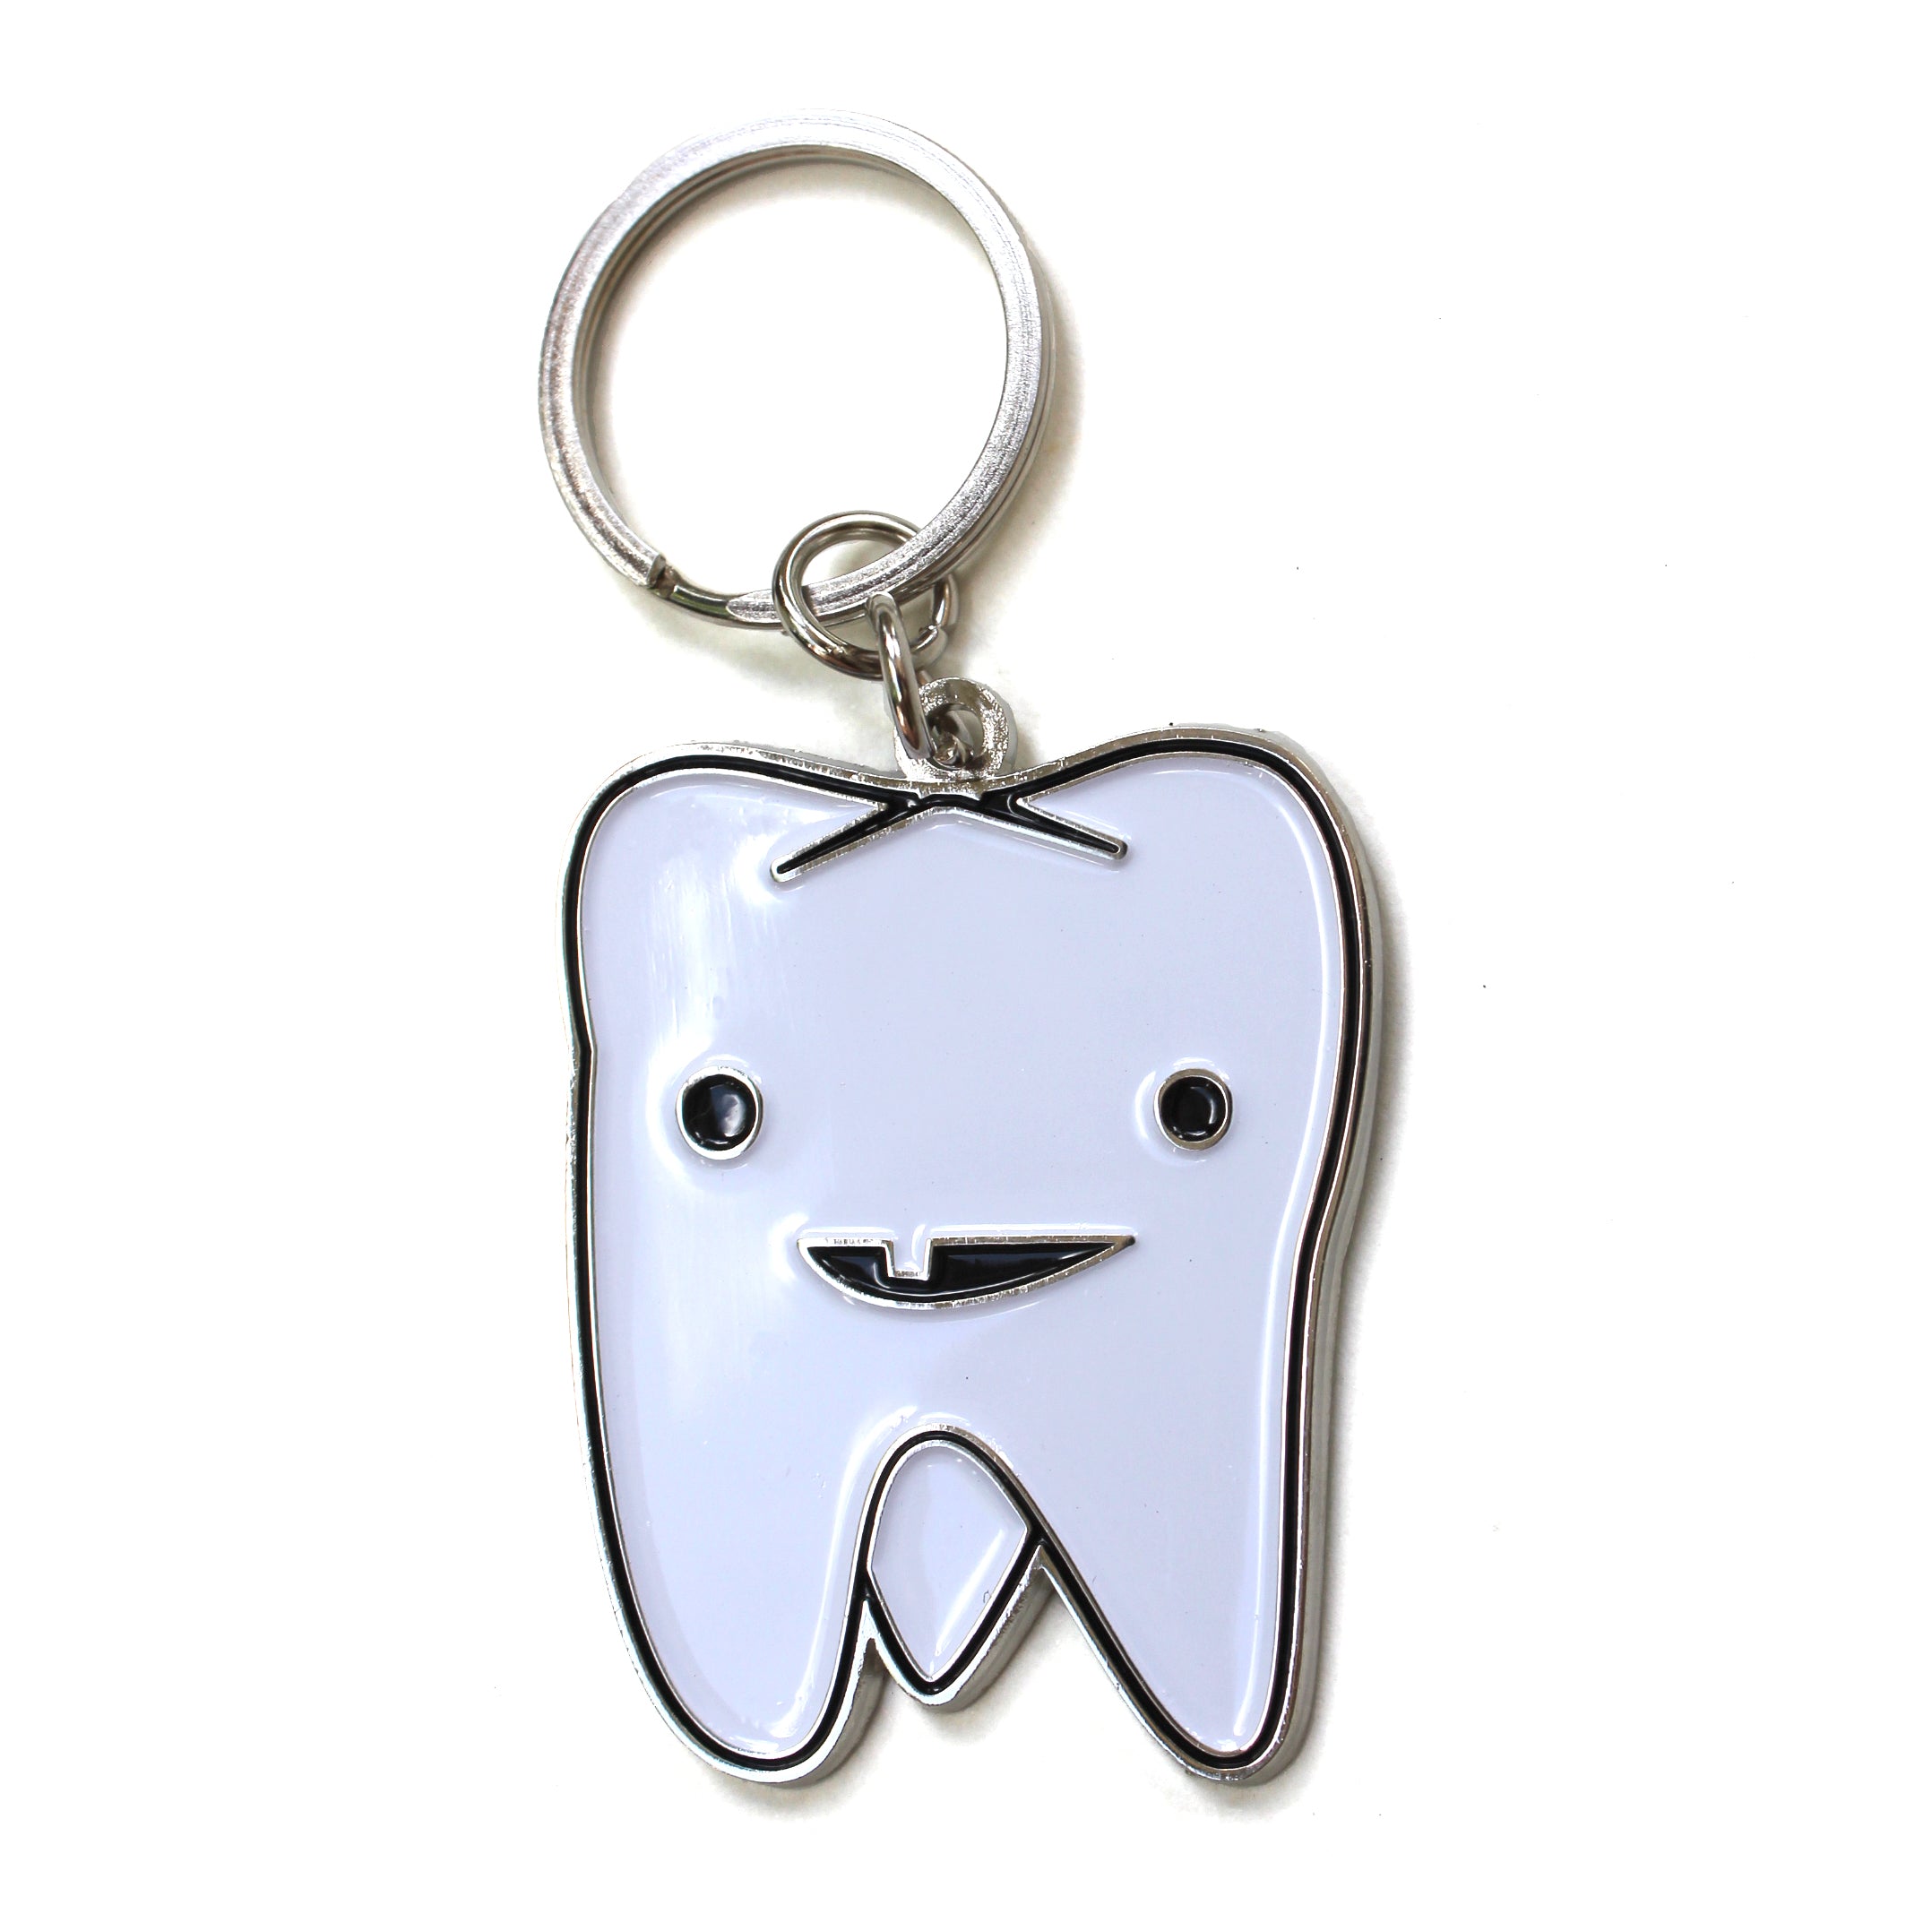 Dentists Floss and Tooth Charm Keychain Gift S 2.30 inches including key ring Dental Hygienist Jewelry Gift for Men & Women Dental Keychain 